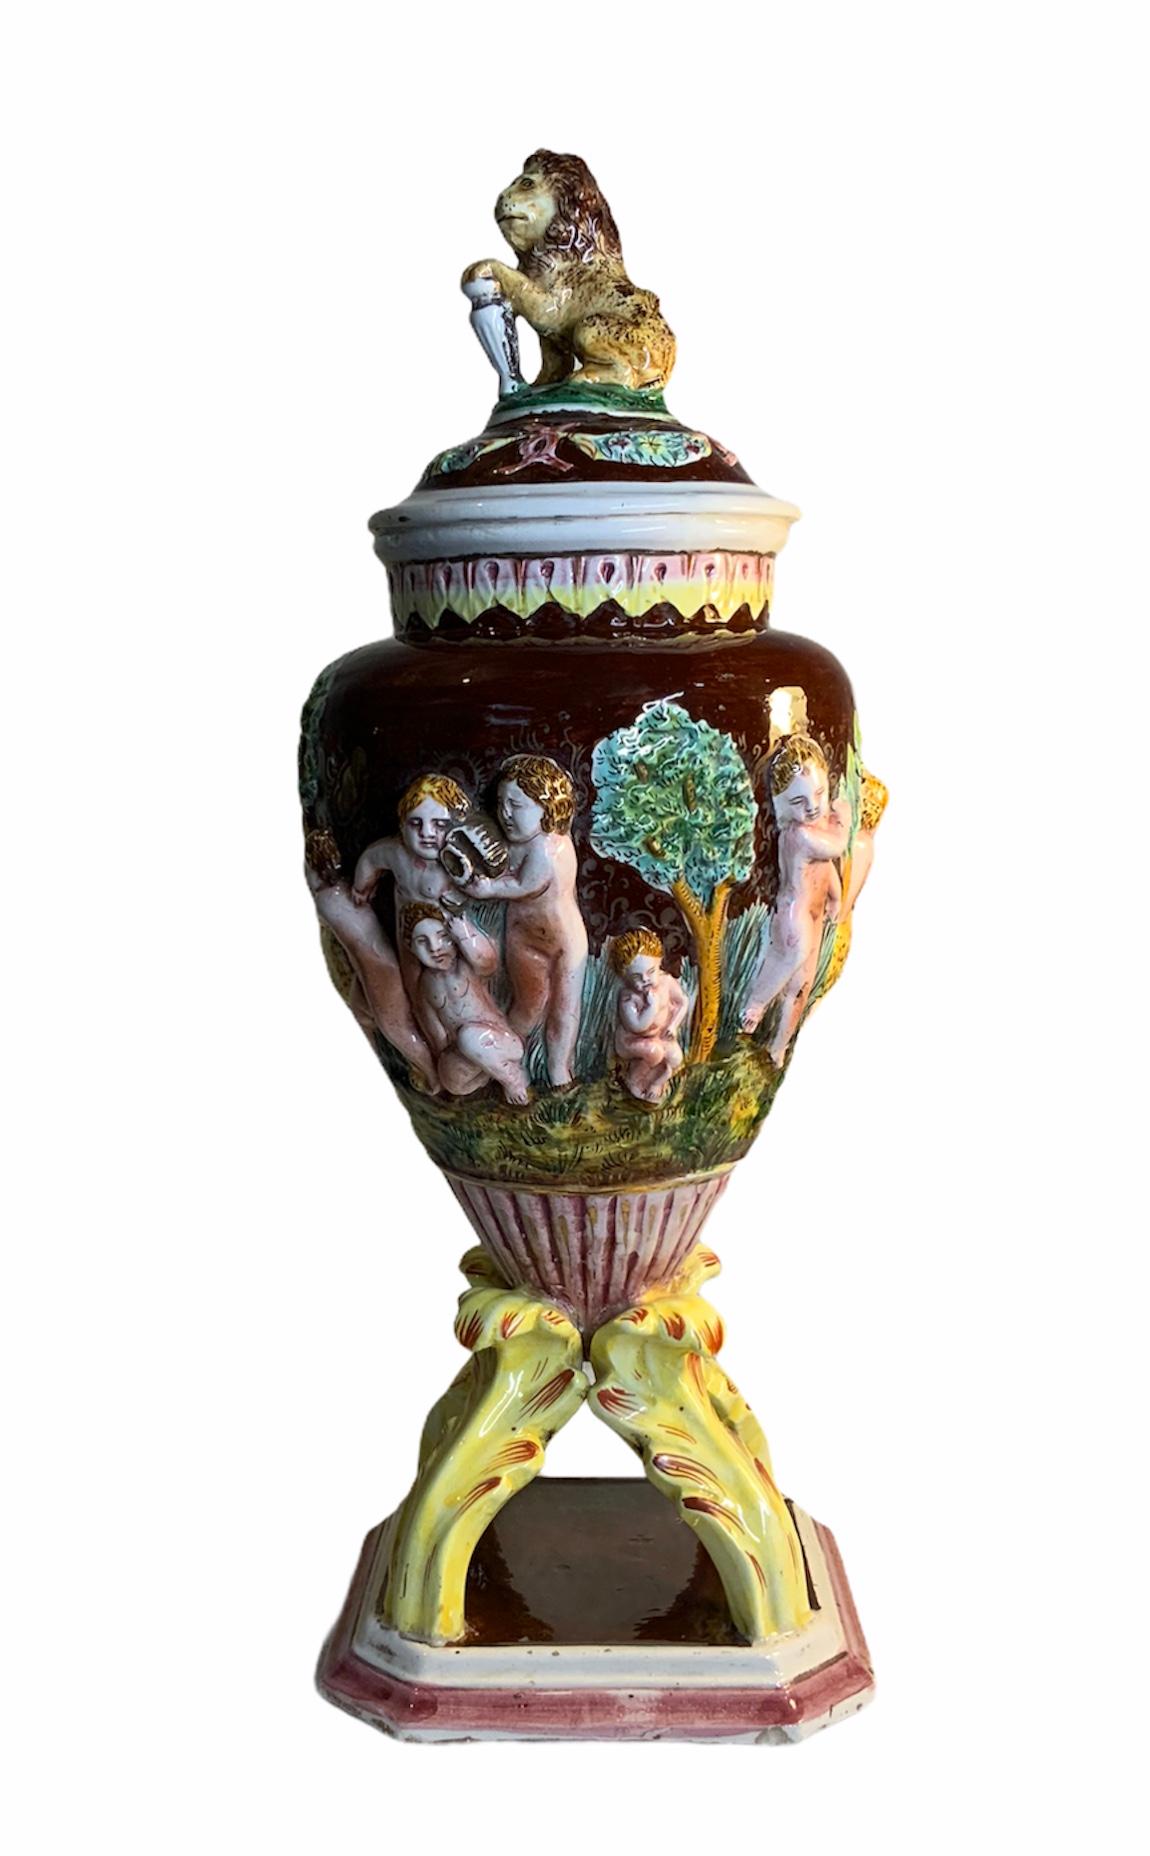 This is an Italian hand painted porcelain urn with a wine color background adorned with a continuous scene of a repousse group of nudes cherubs in the jungle. Some of them are playing with a tiger and others are wondering around. The urn is